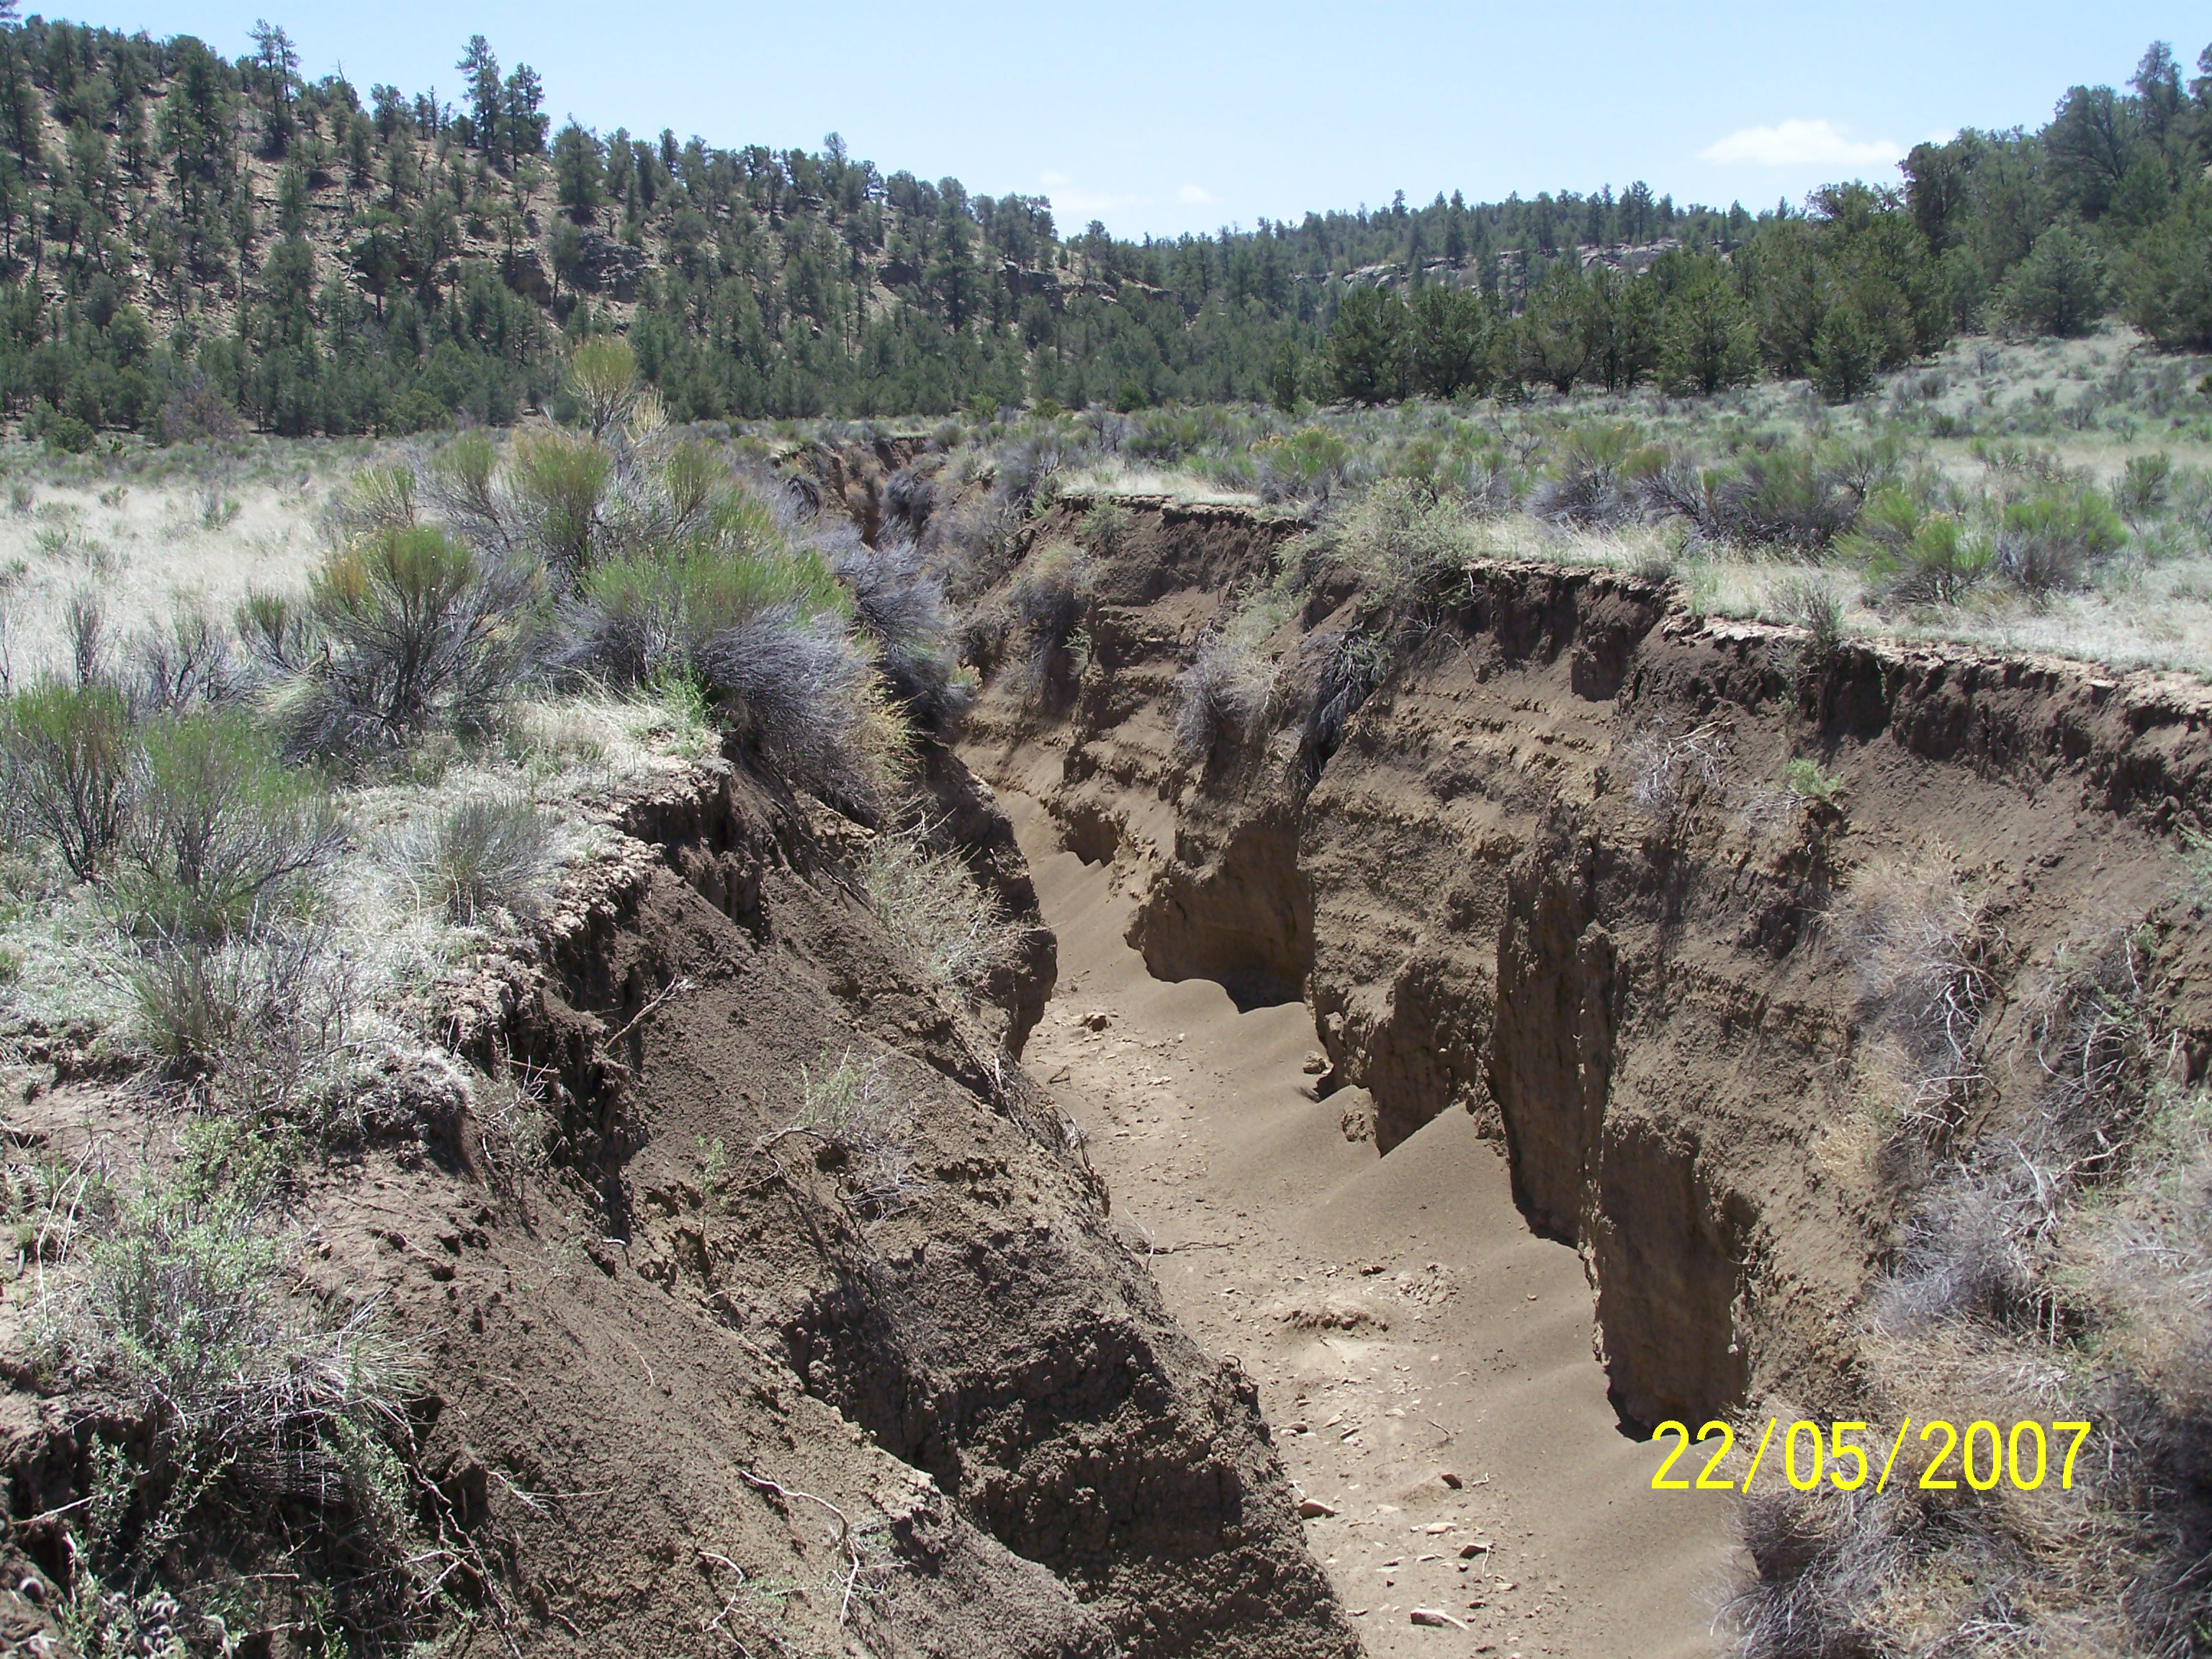 Feature 26 (arroyo road) looking south-east